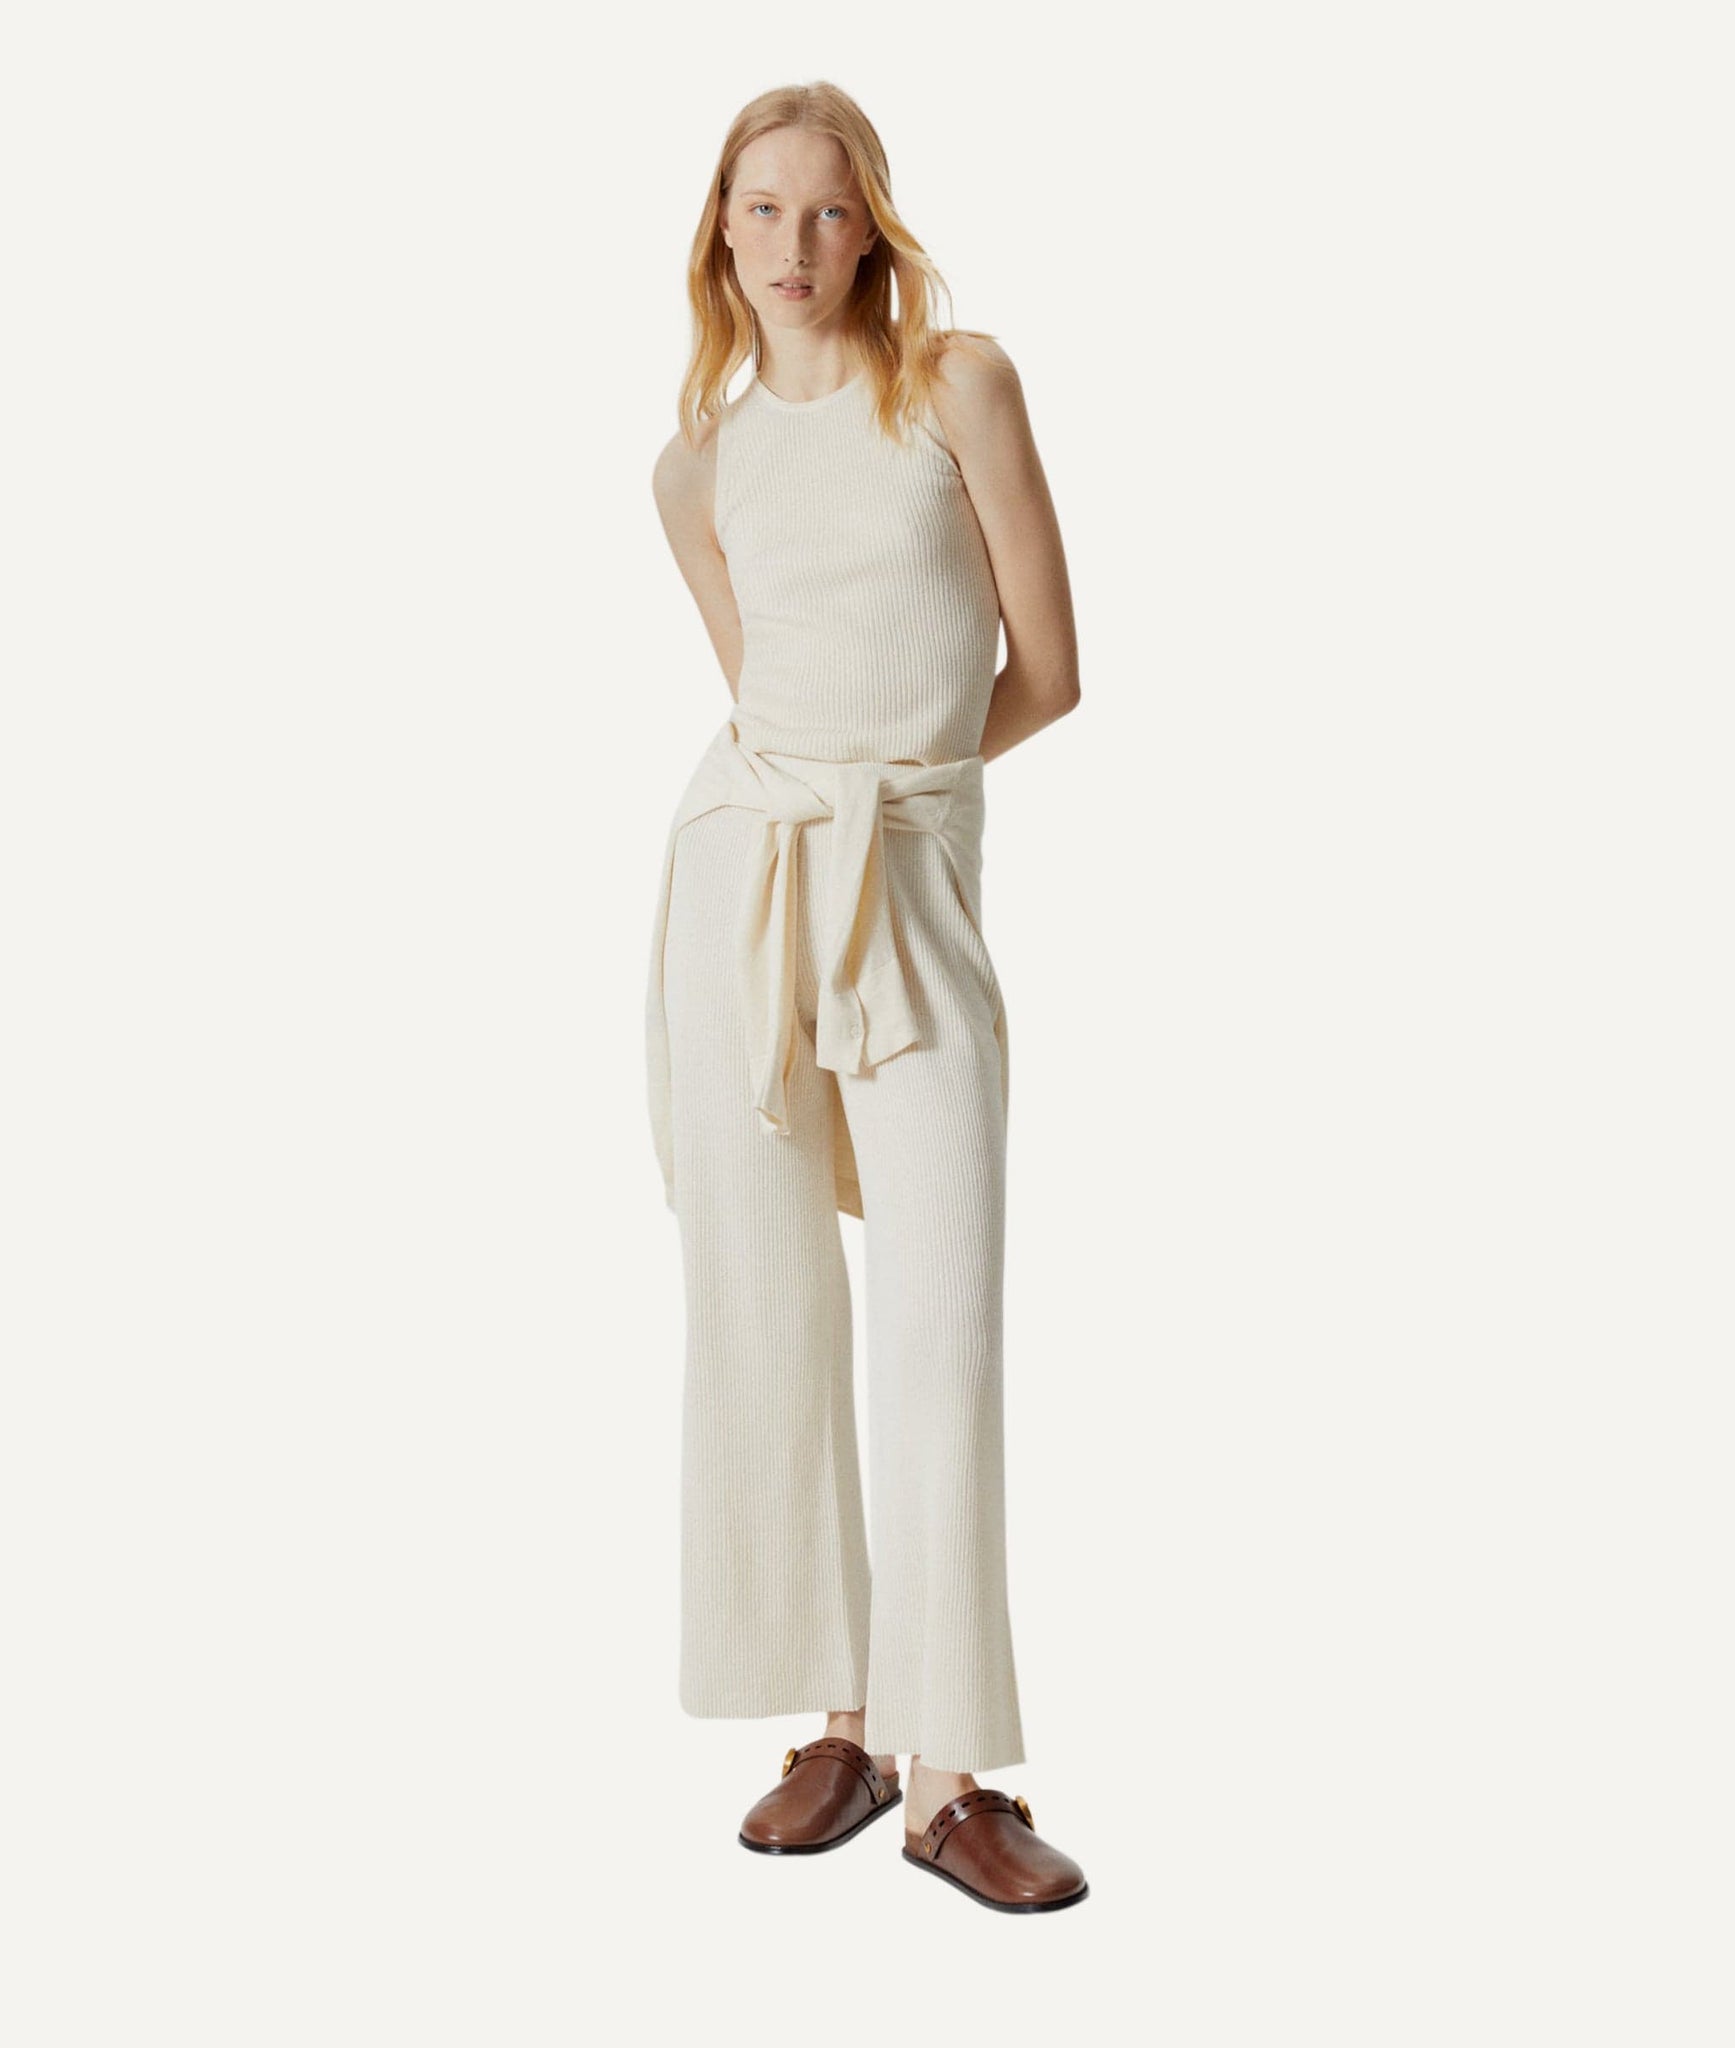 The Linen Cotton Ribbed Pants